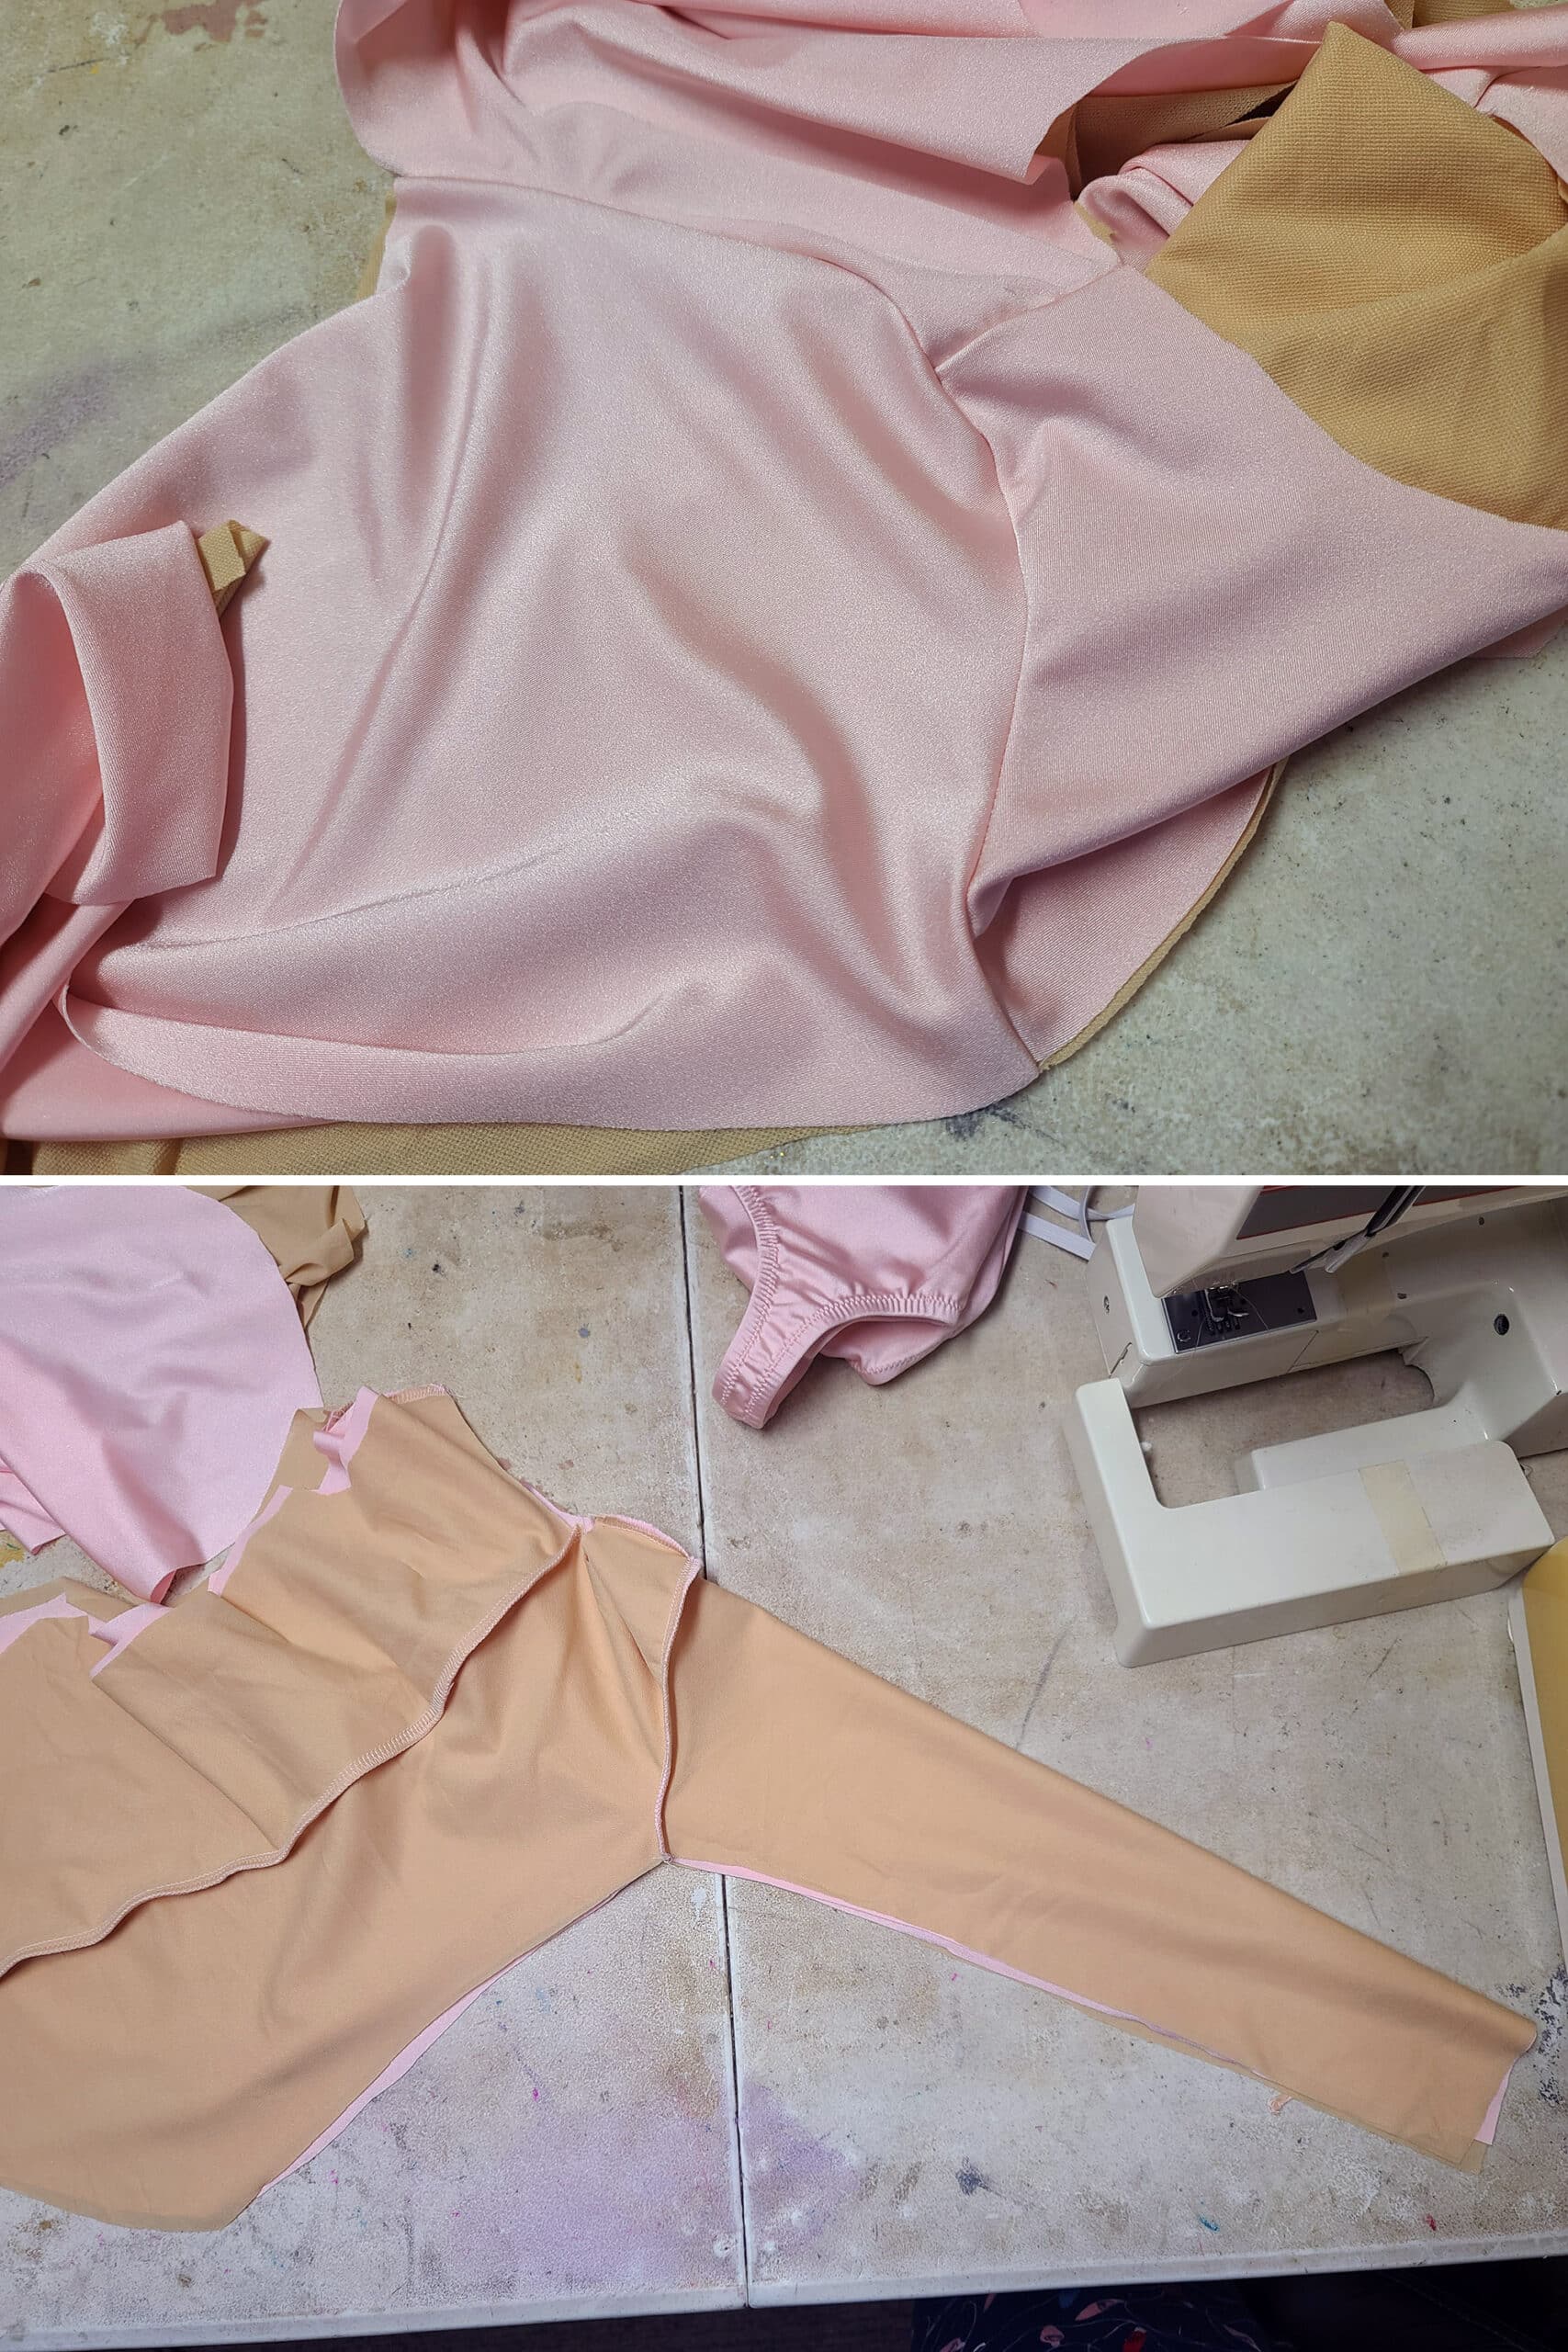 2 part image showing the sewn in sleeve and bodysuit flipped inside out, with the side seam and sleeve seams lined up.